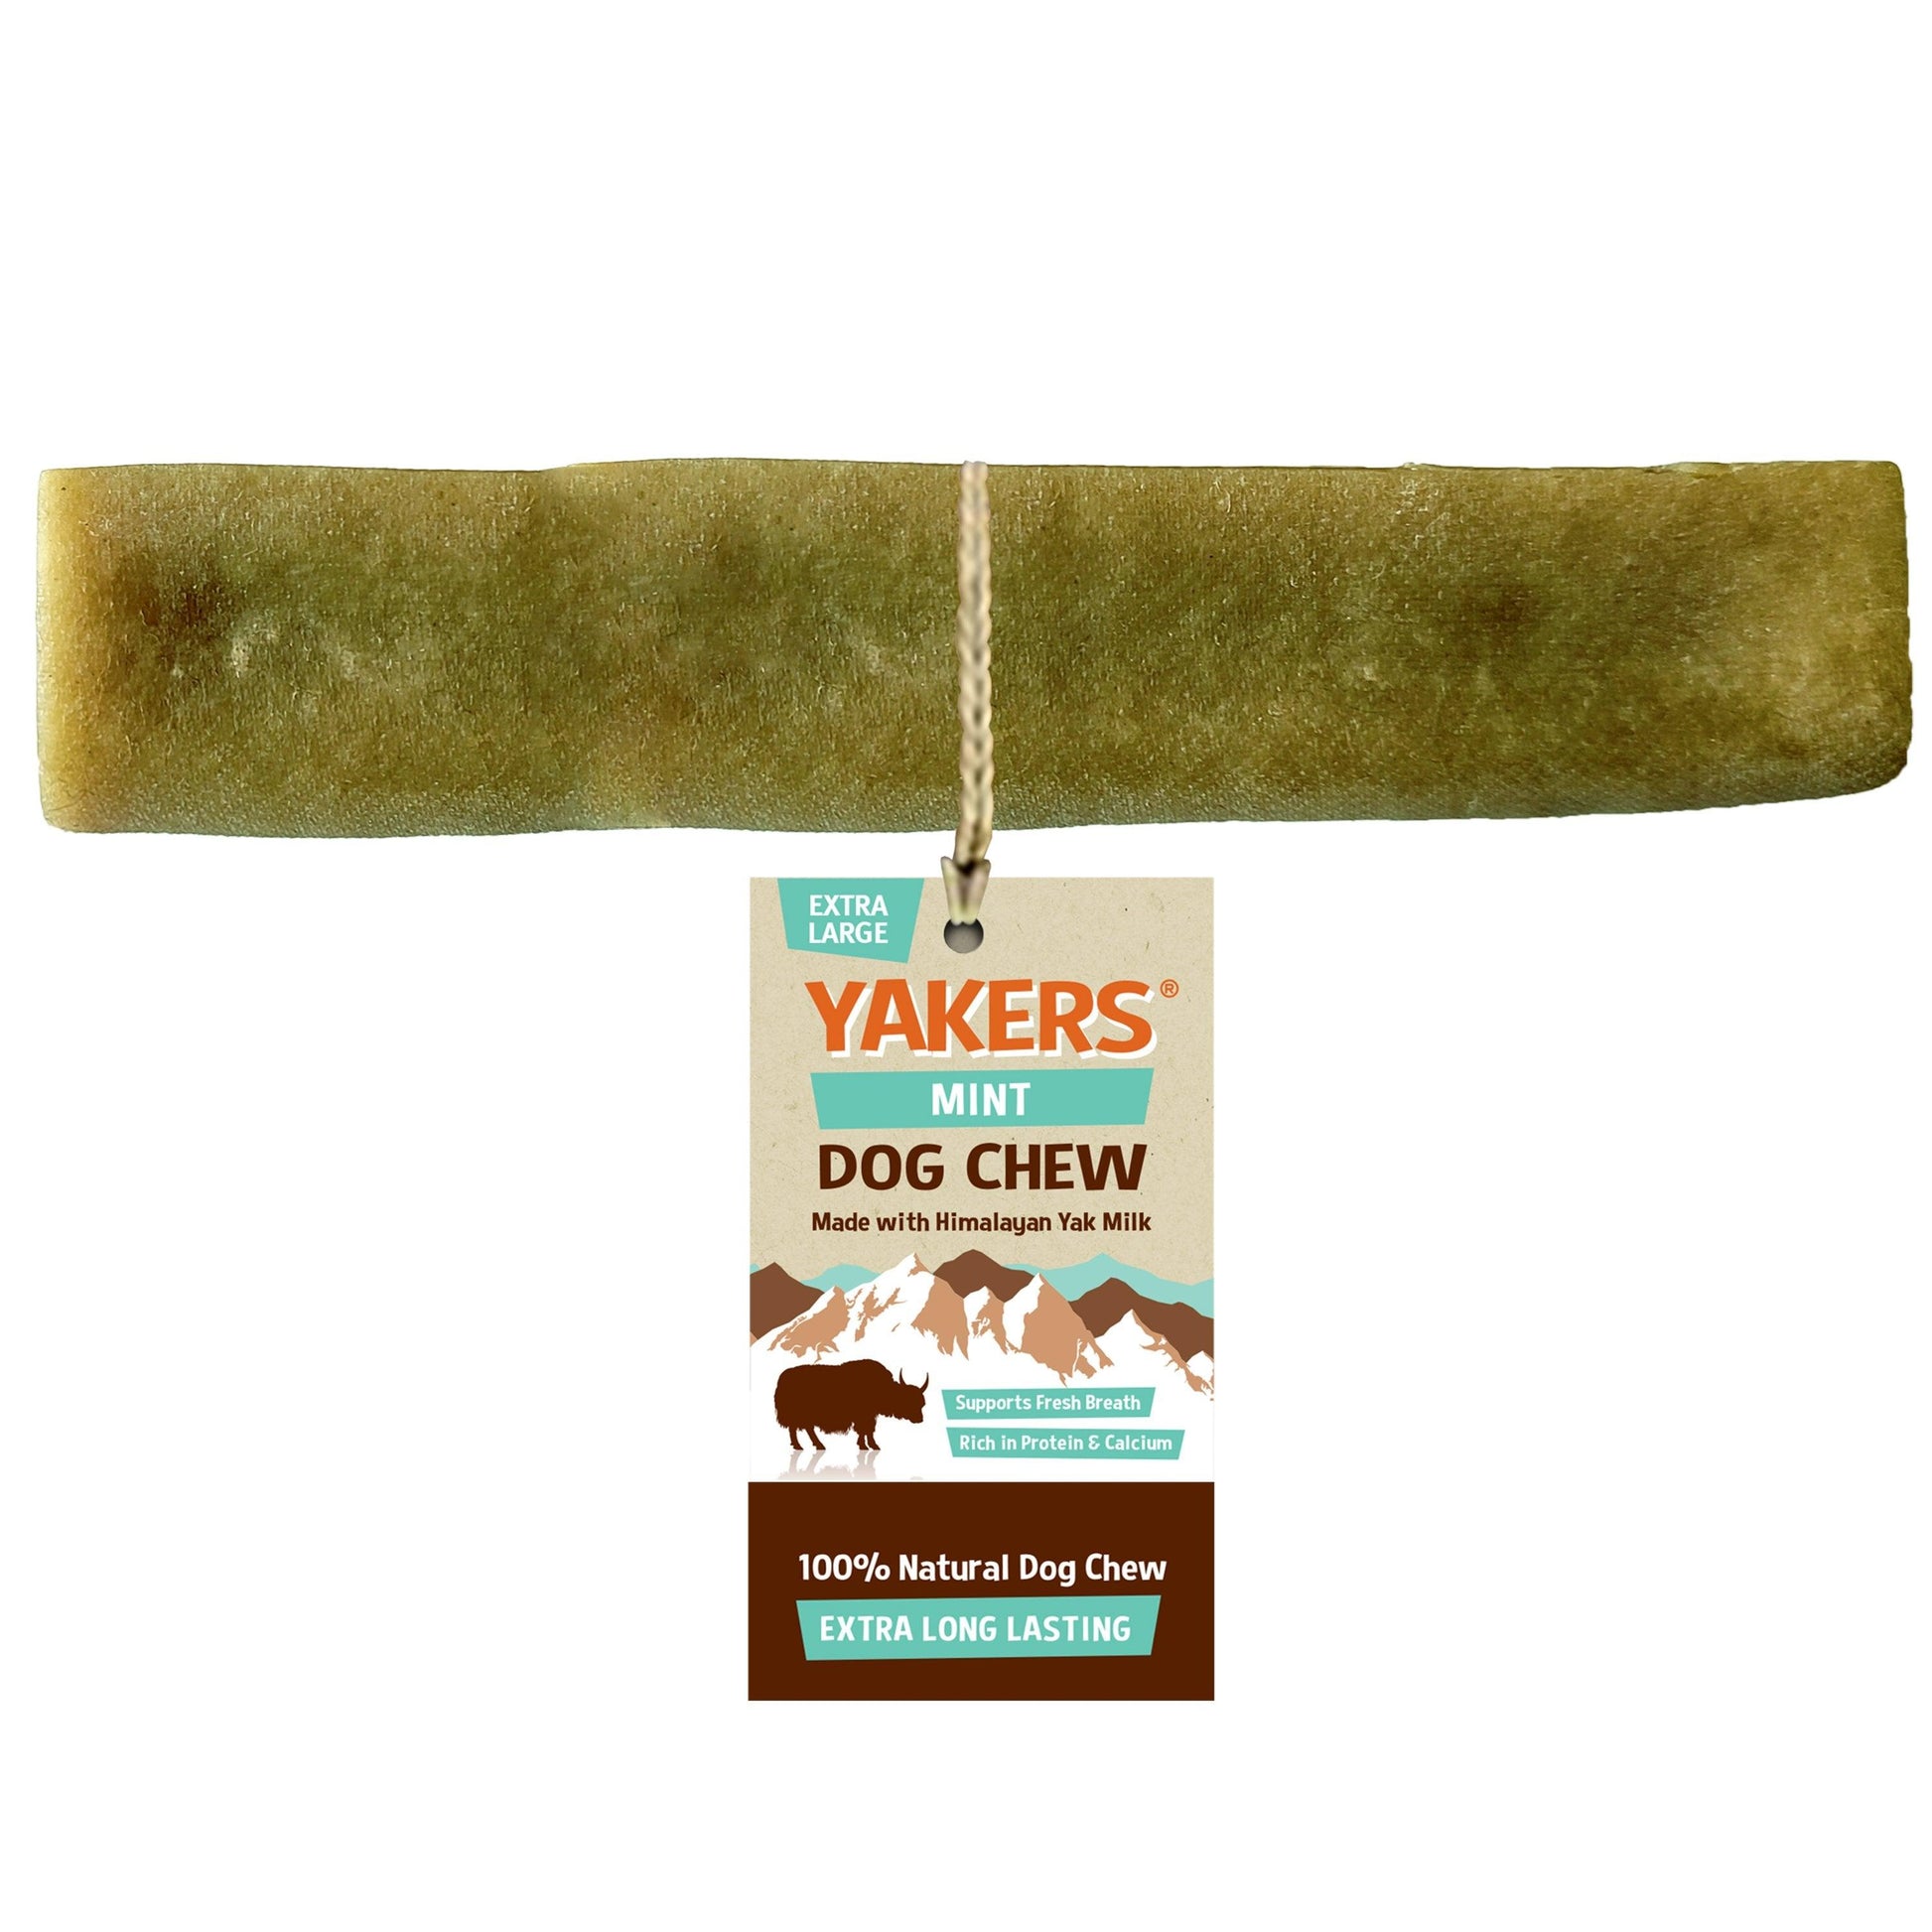 Yakers Mint Dog Chew - North East Pet Shop Yakers